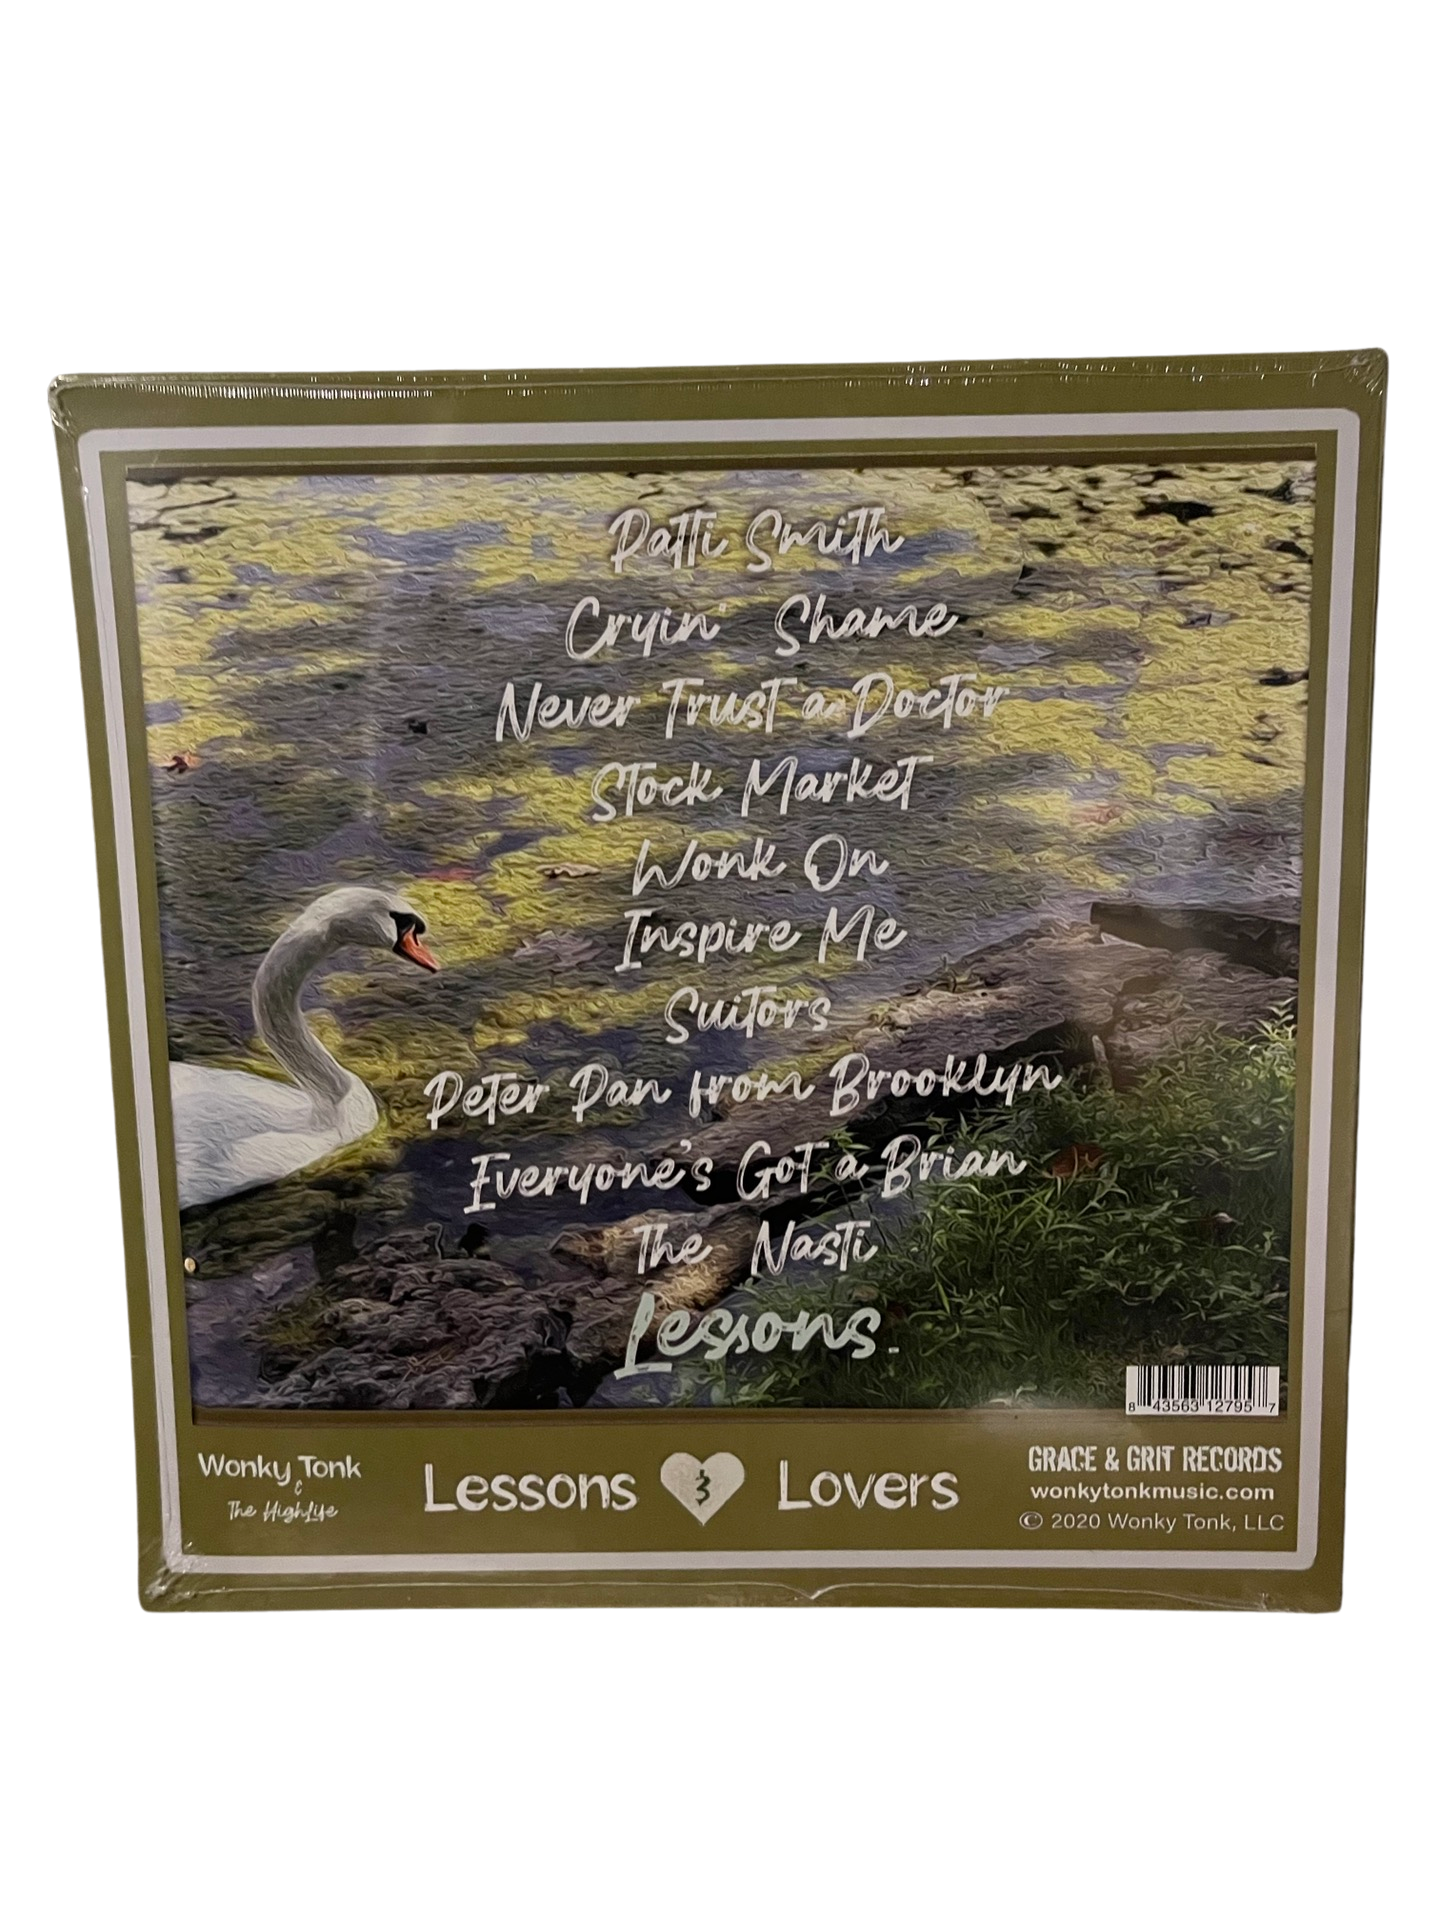 00 Lessons and Lovers Vinyl